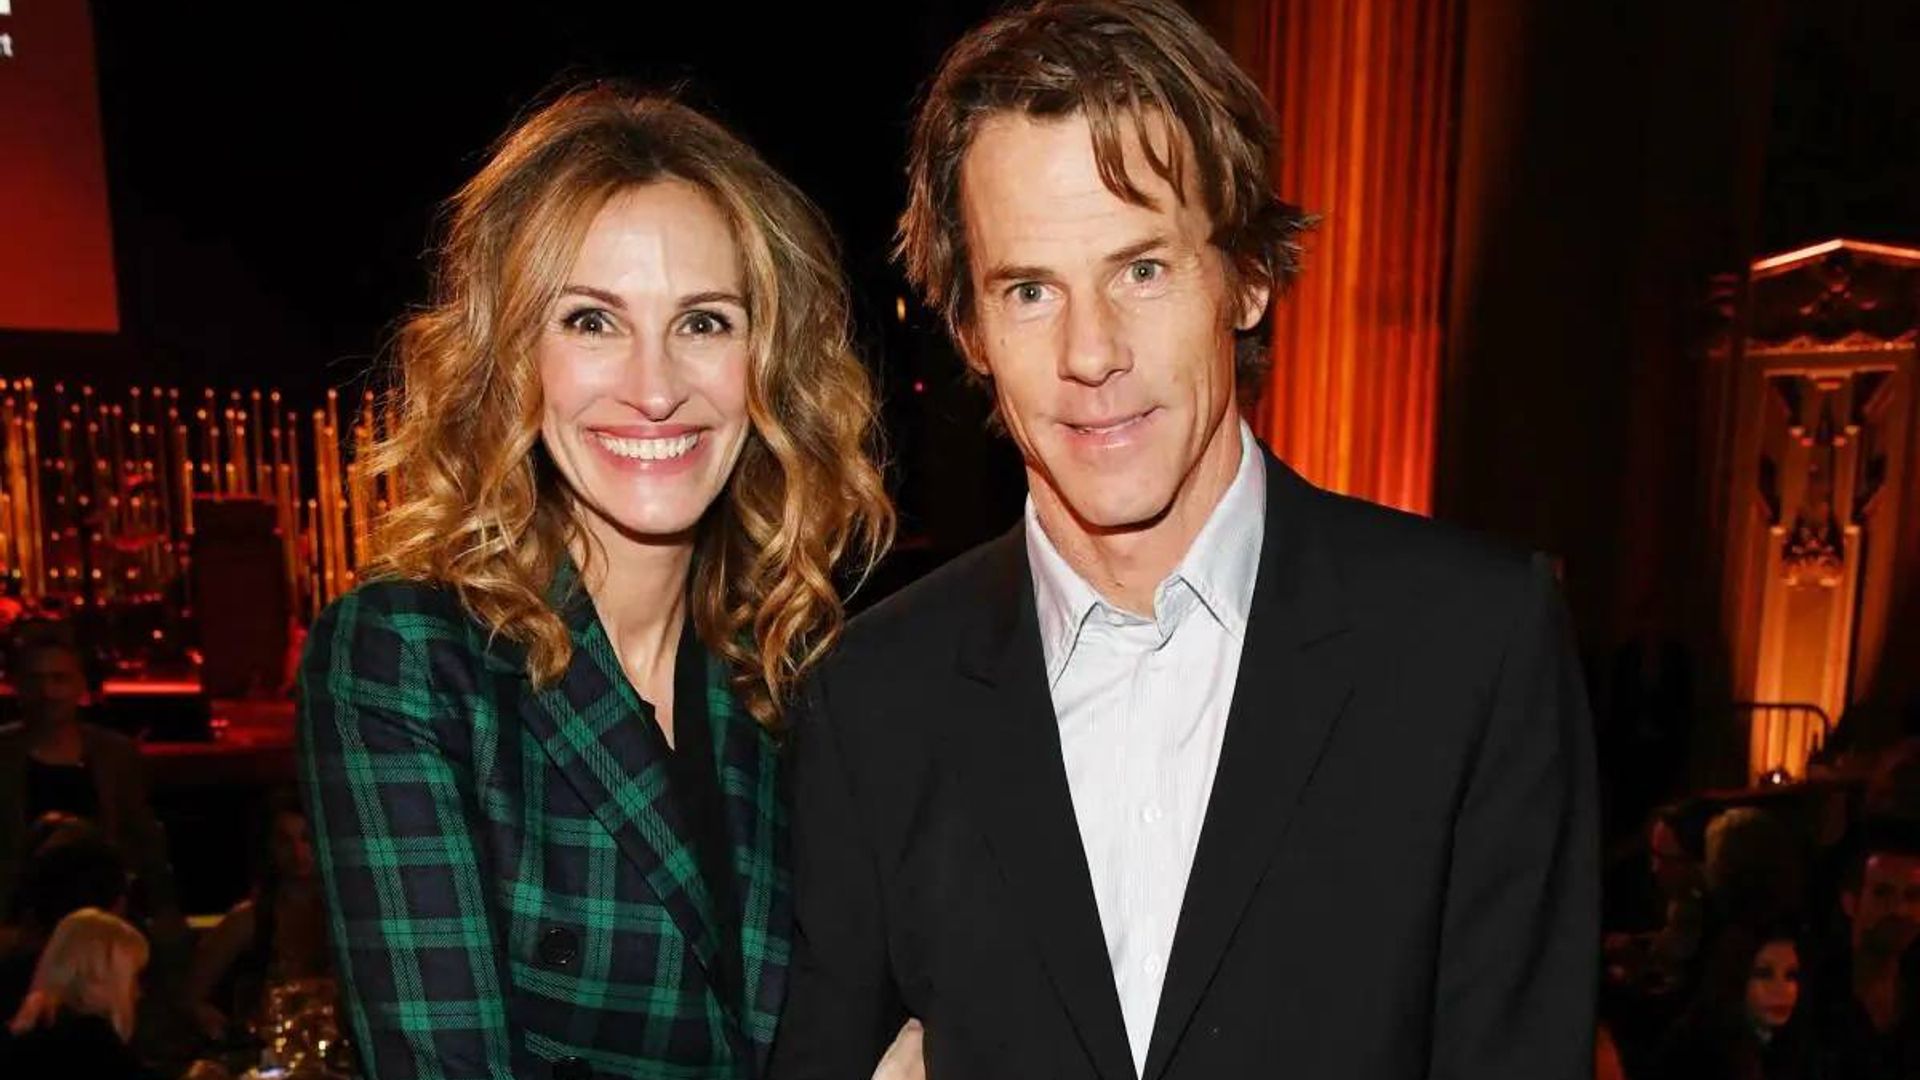 Julia Roberts' sweet marriage details to Danny Moder will leave you lost for words